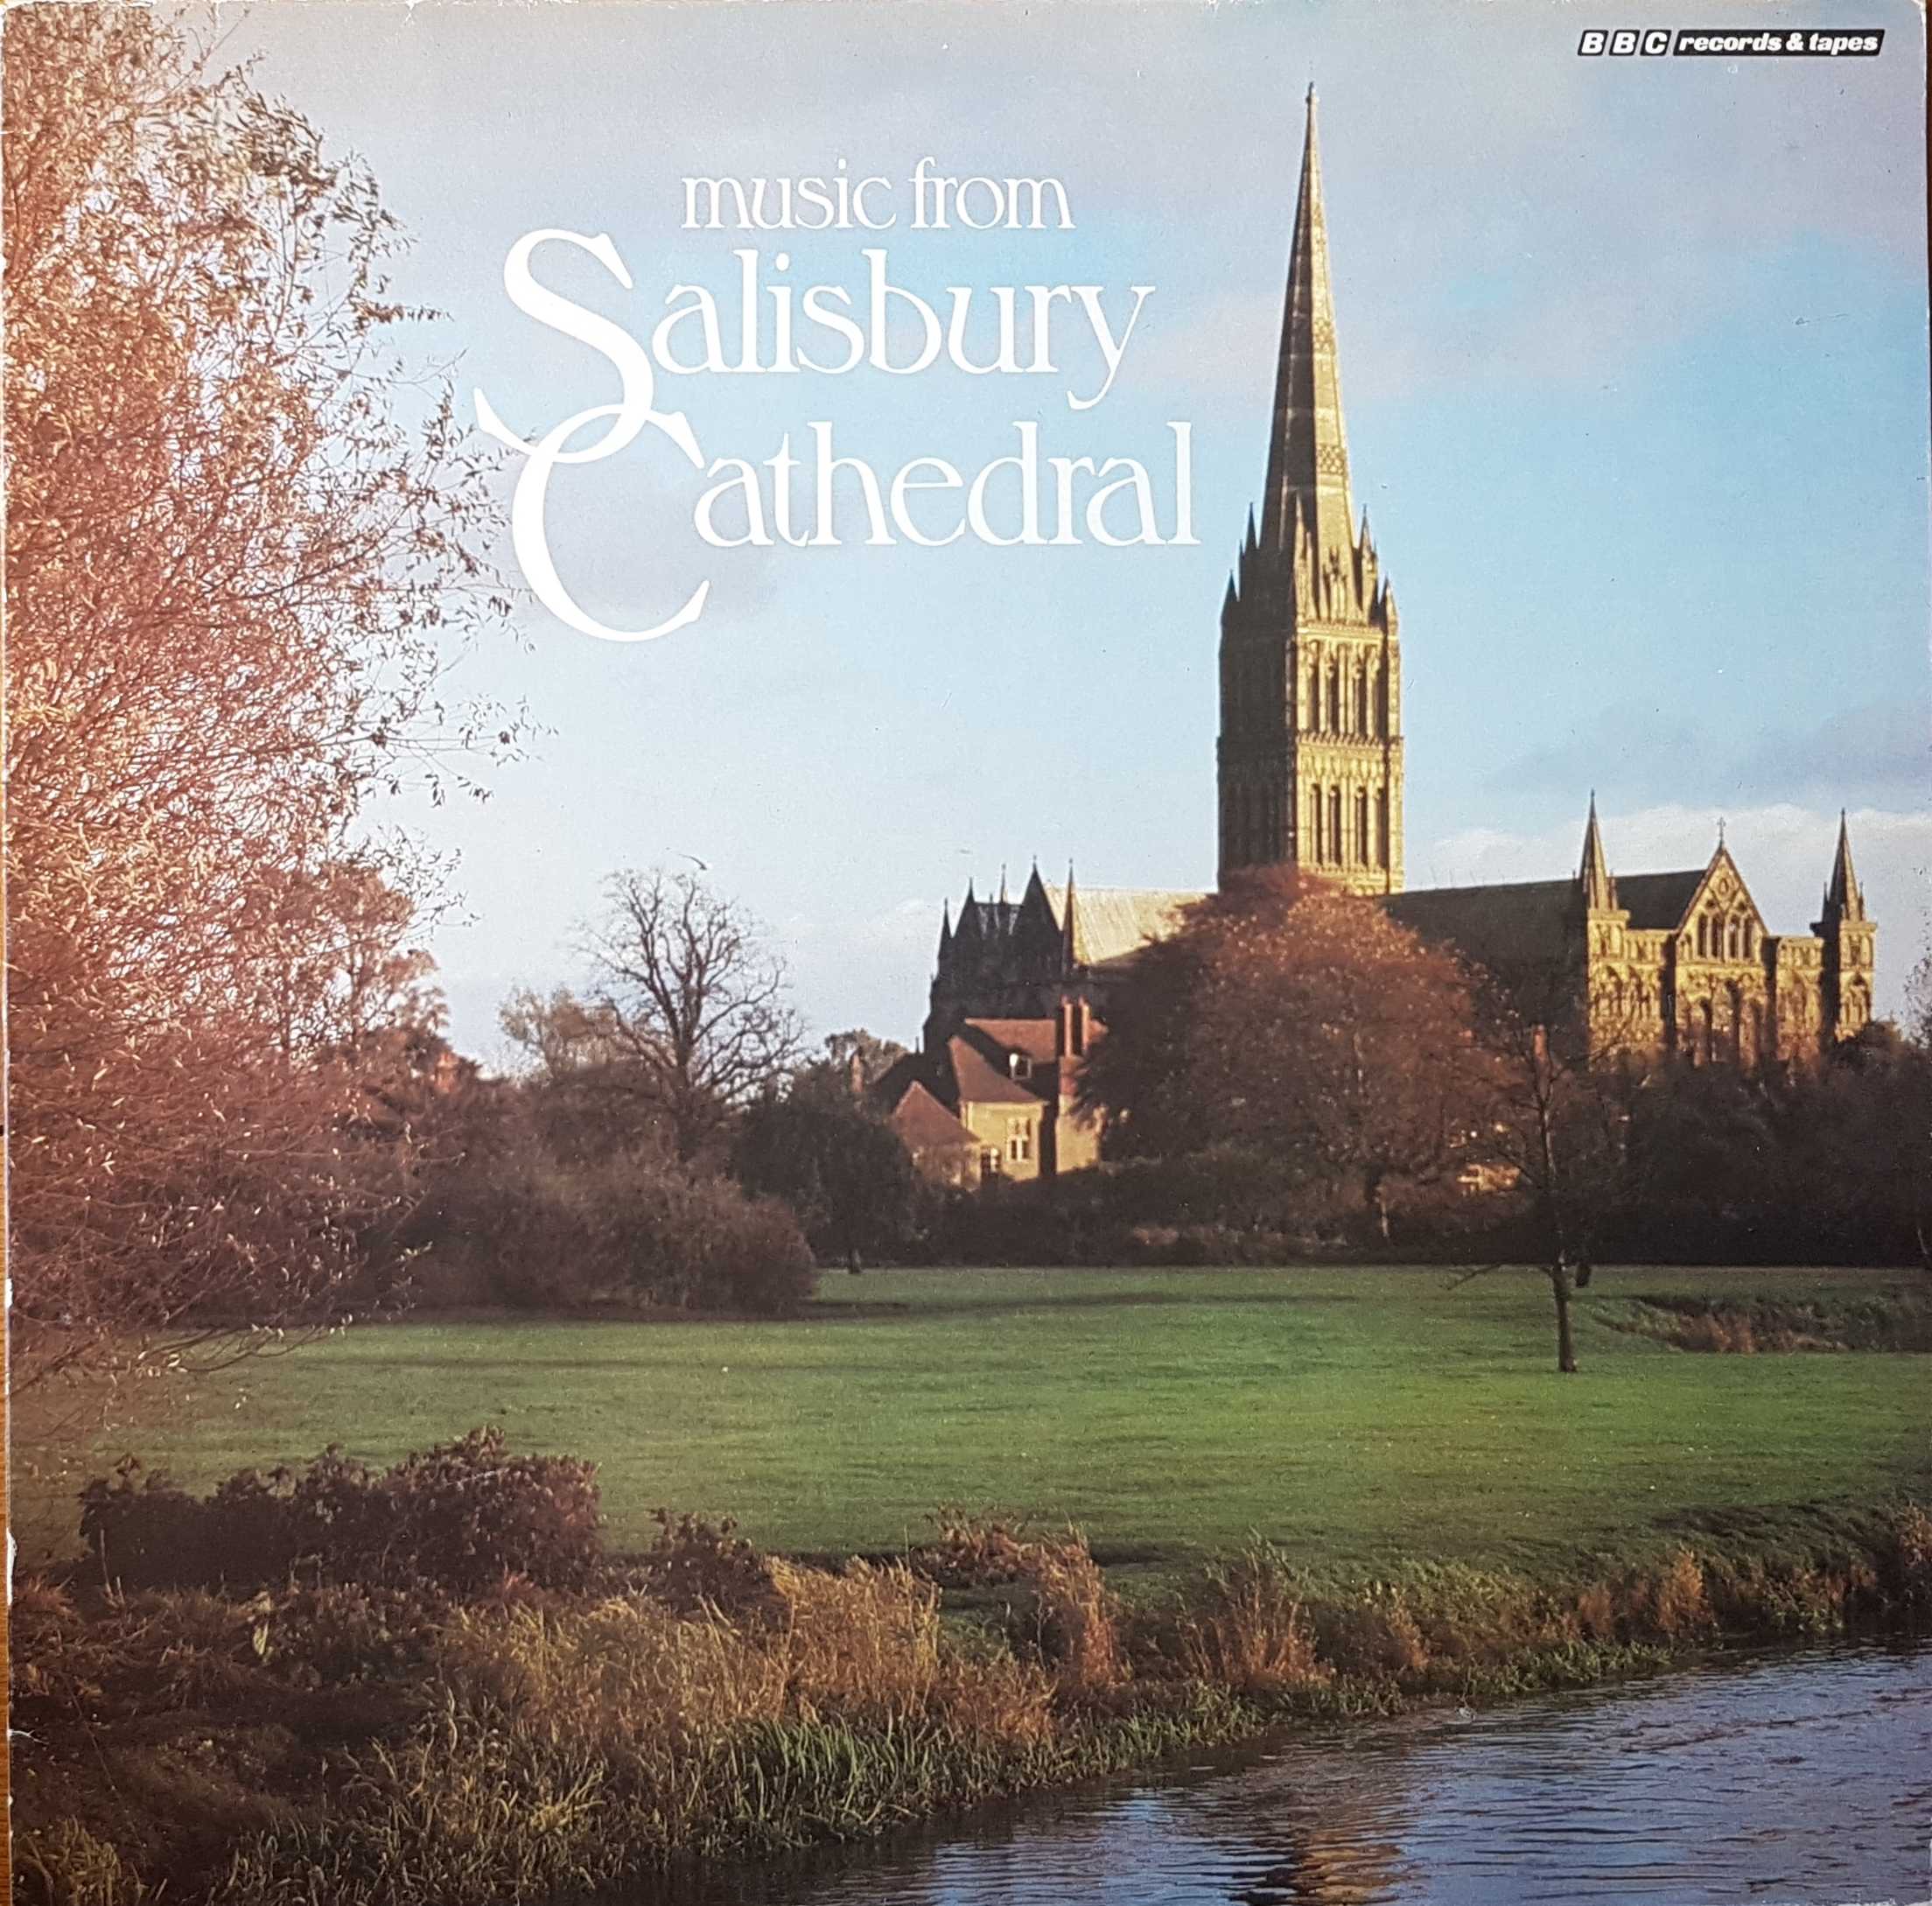 Picture of REC 323 Music from Salisbury Cathedral by artist Various from the BBC albums - Records and Tapes library